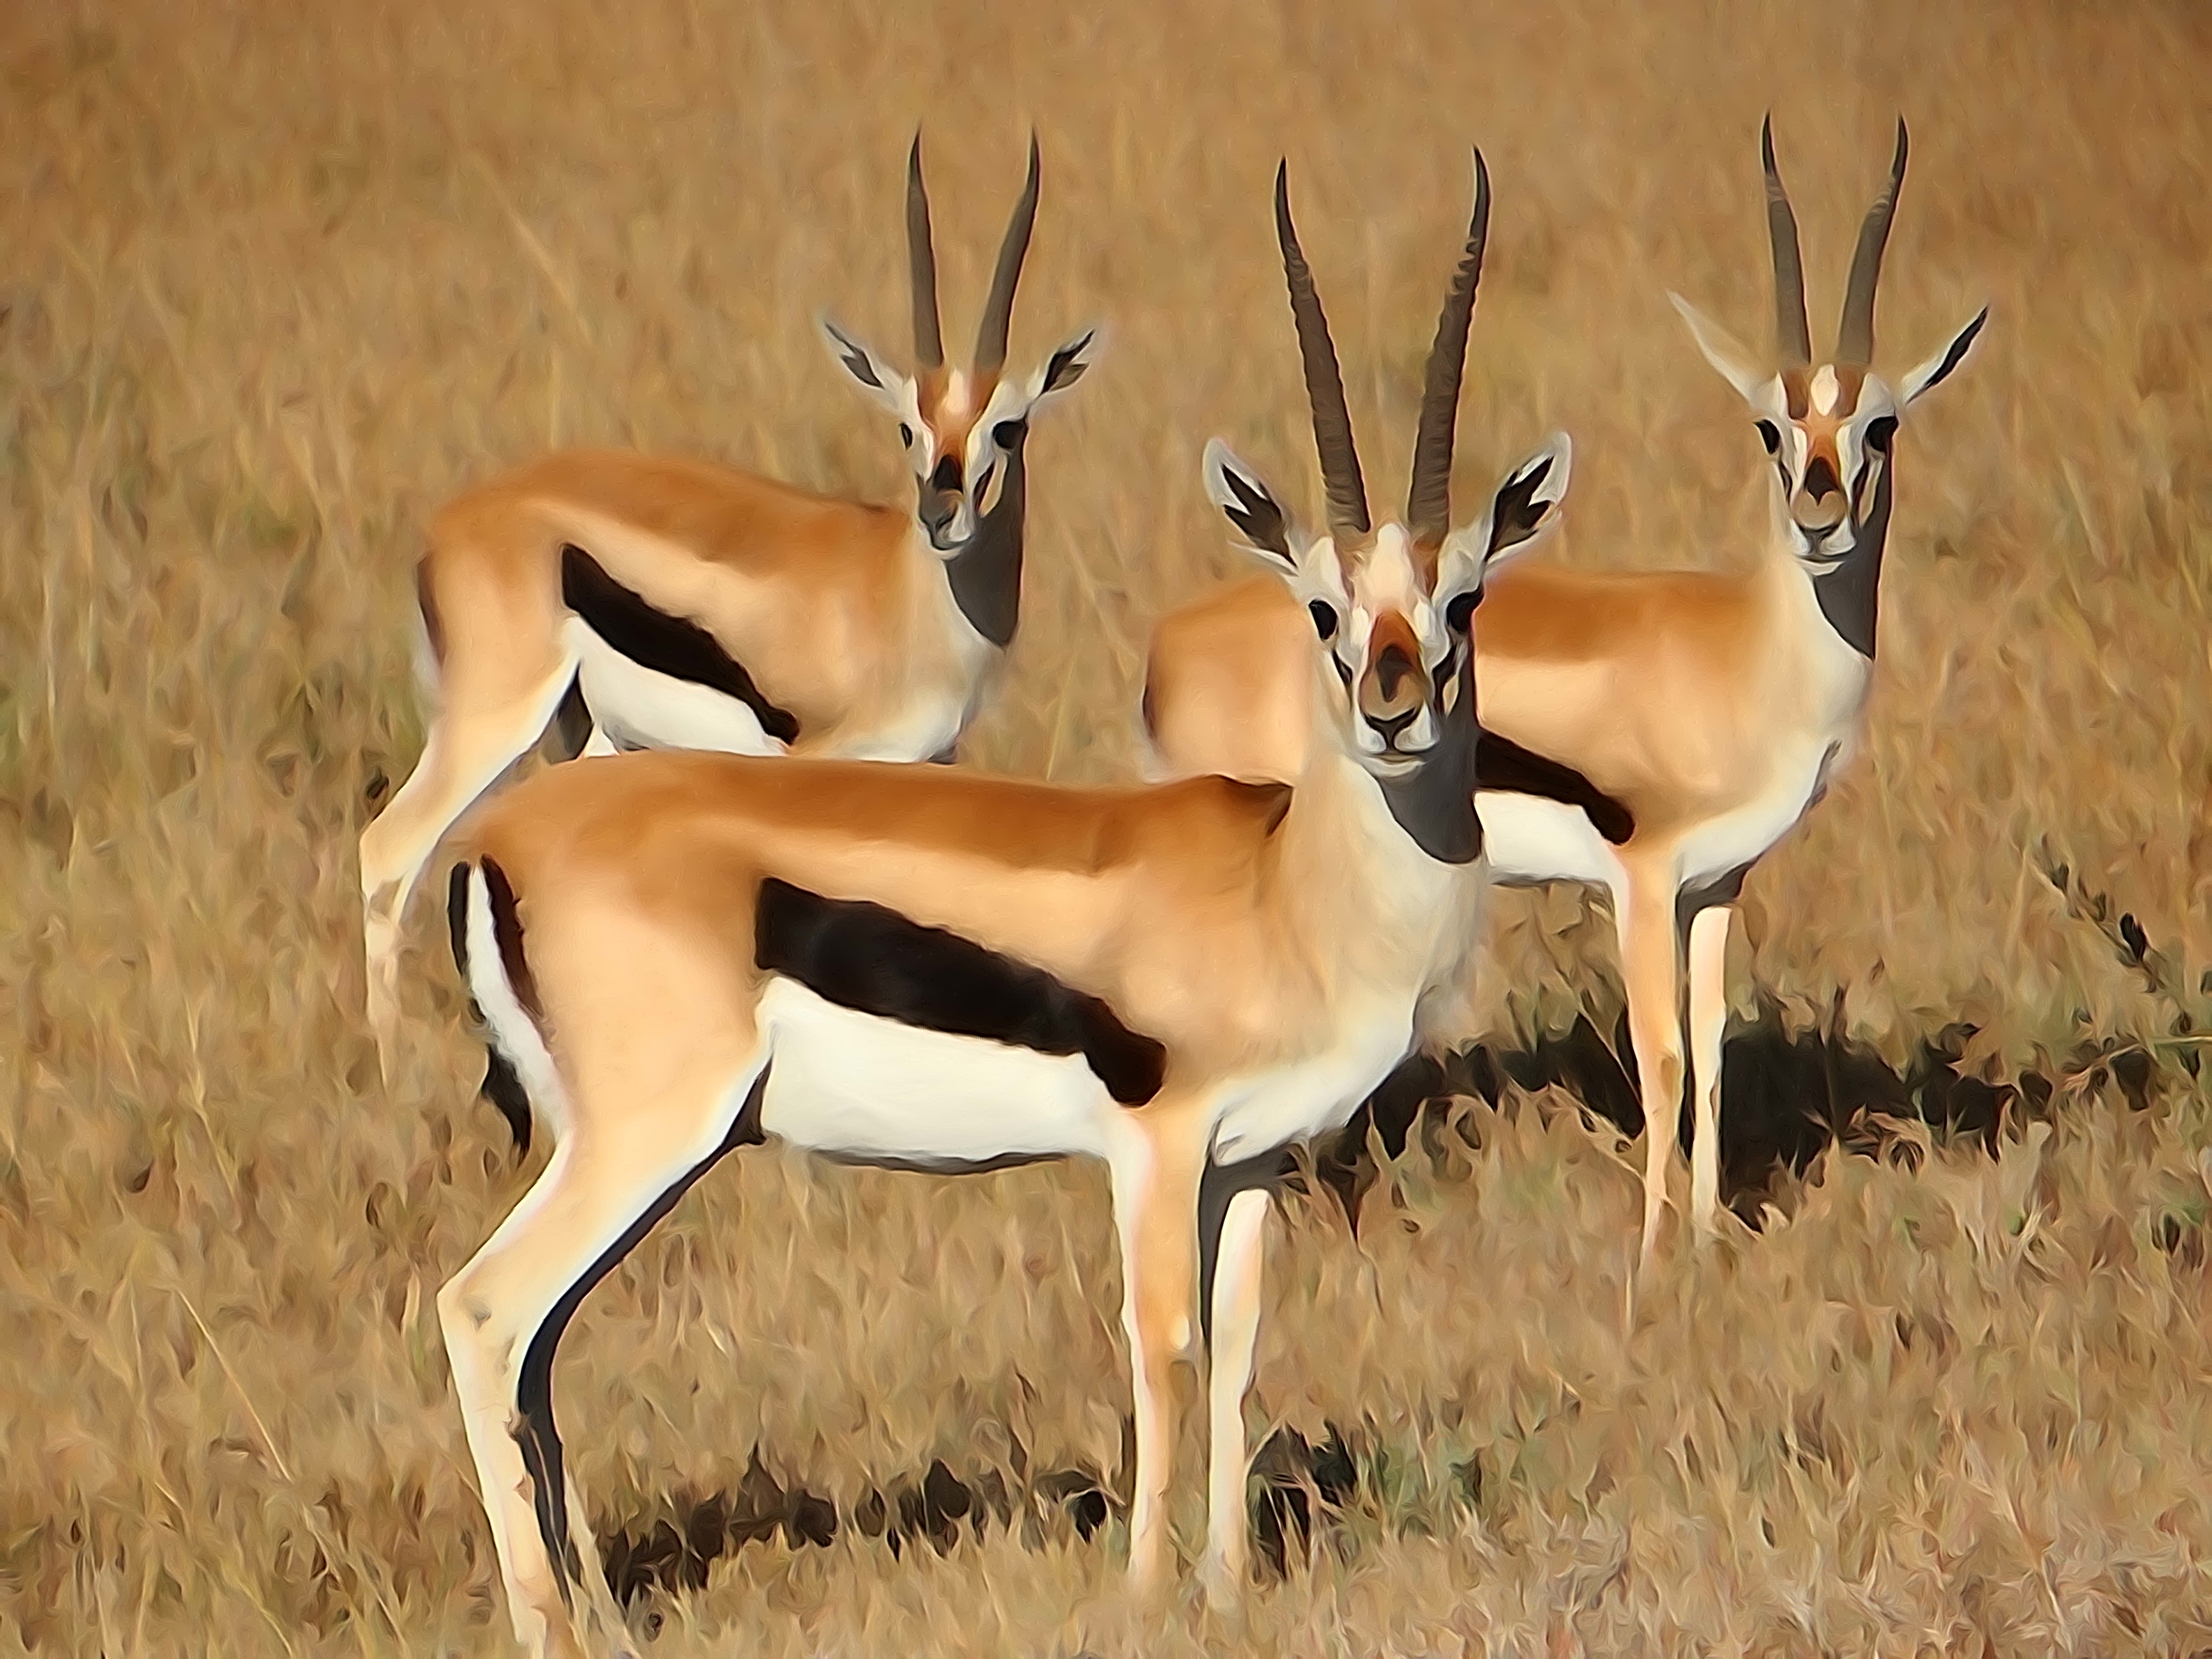 Gazelles dreams meaning - Interpretation and Meaning